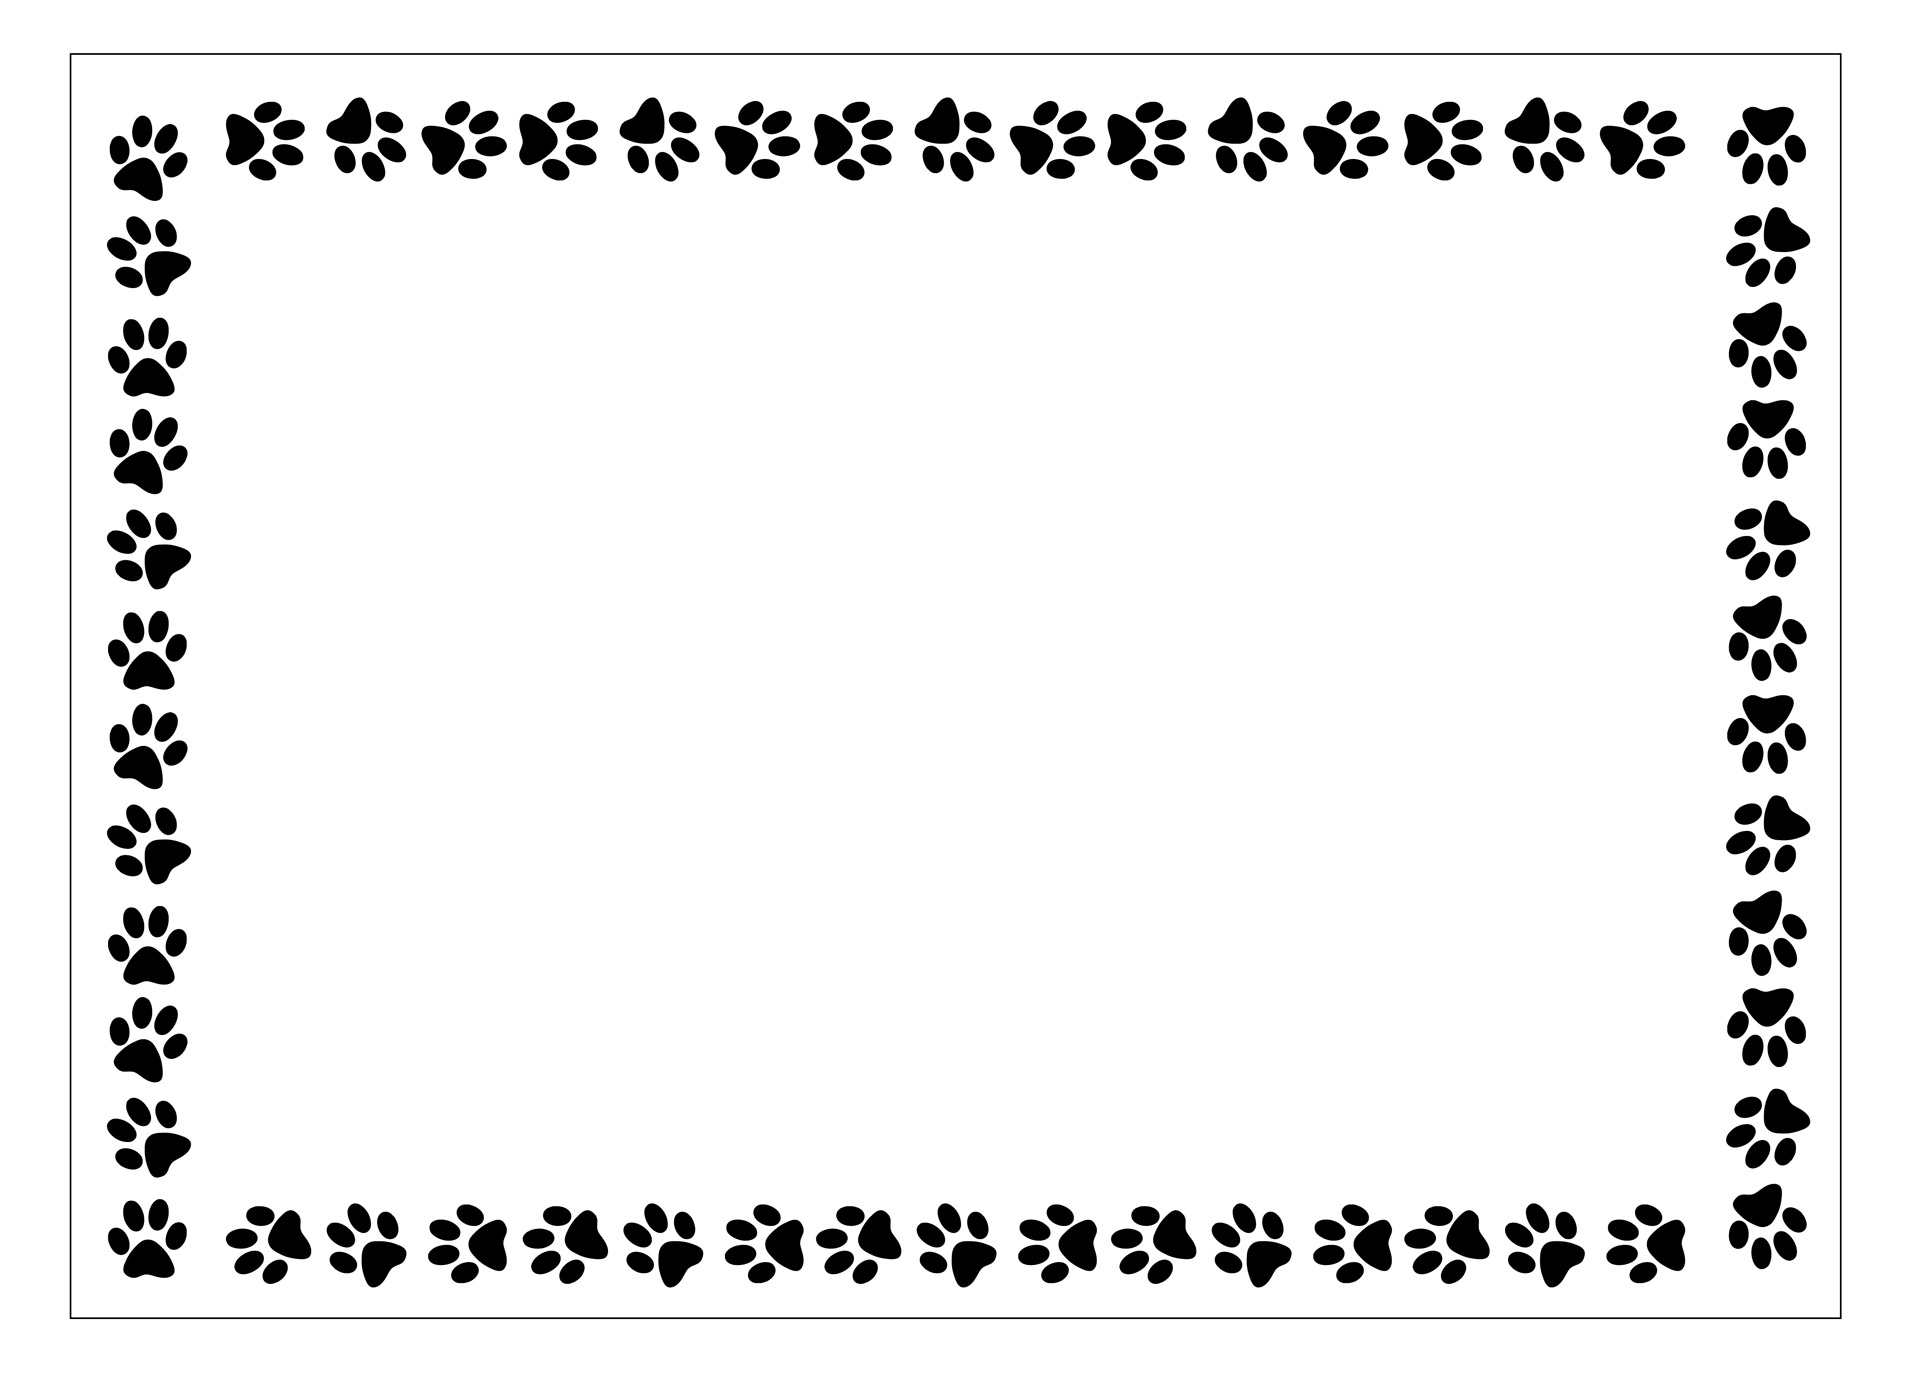 Clipart animal paws borders